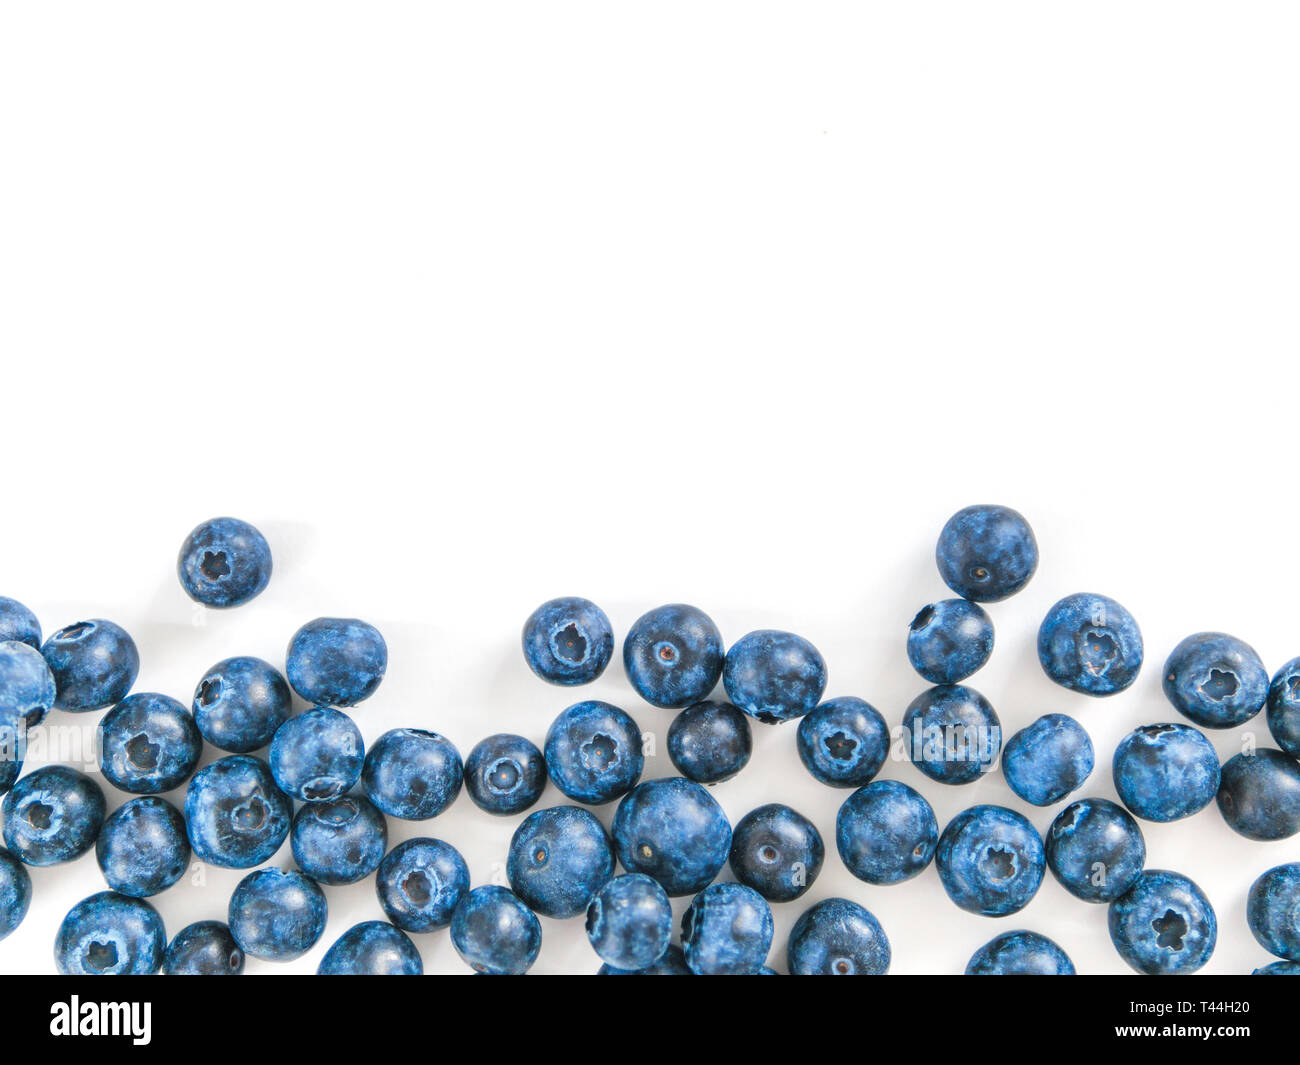 Creative layout with fresh ripe berries. Blueberry isolated on white background with copy space. Can use for your design, promo, social media. Top view. Stock Photo